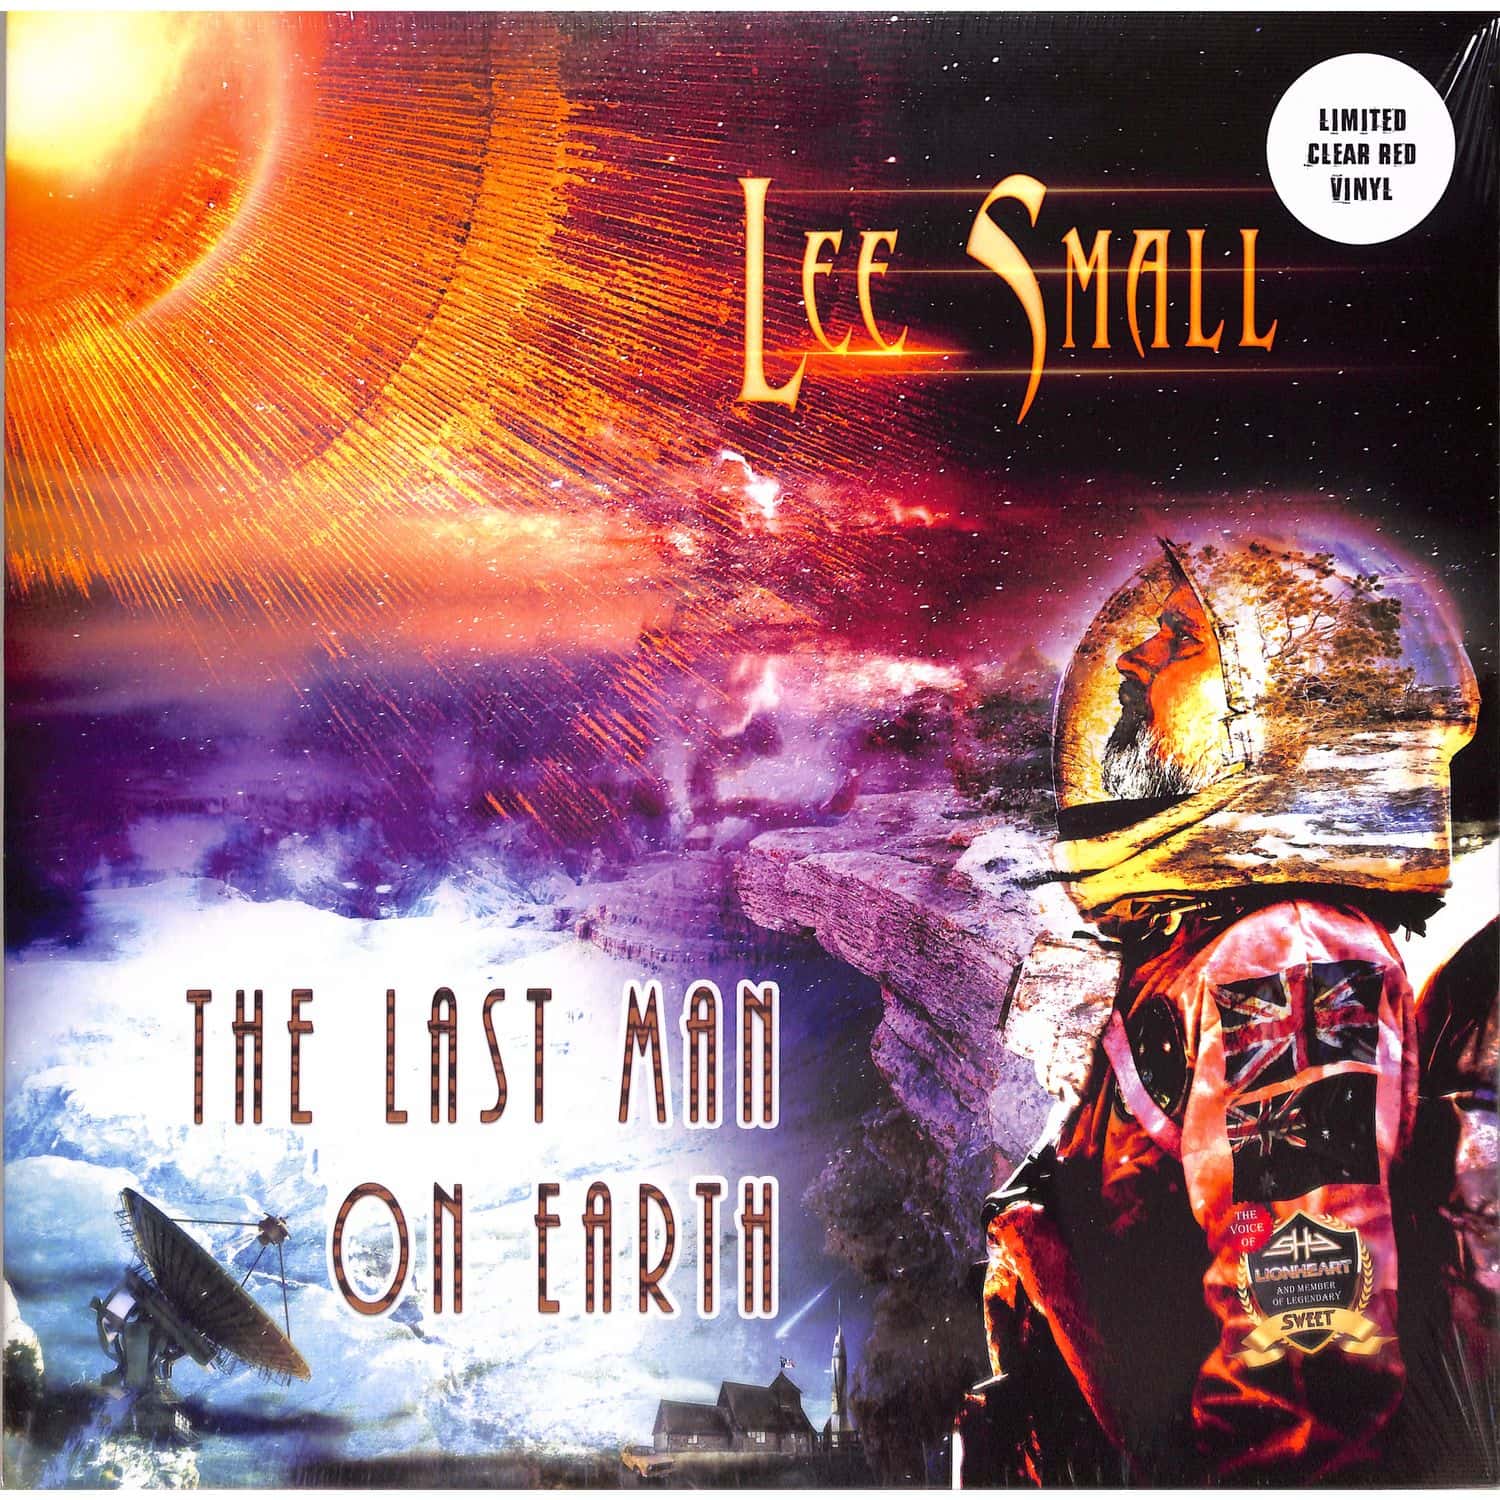  Lee Small - THE LAST MAN ON EARTH 